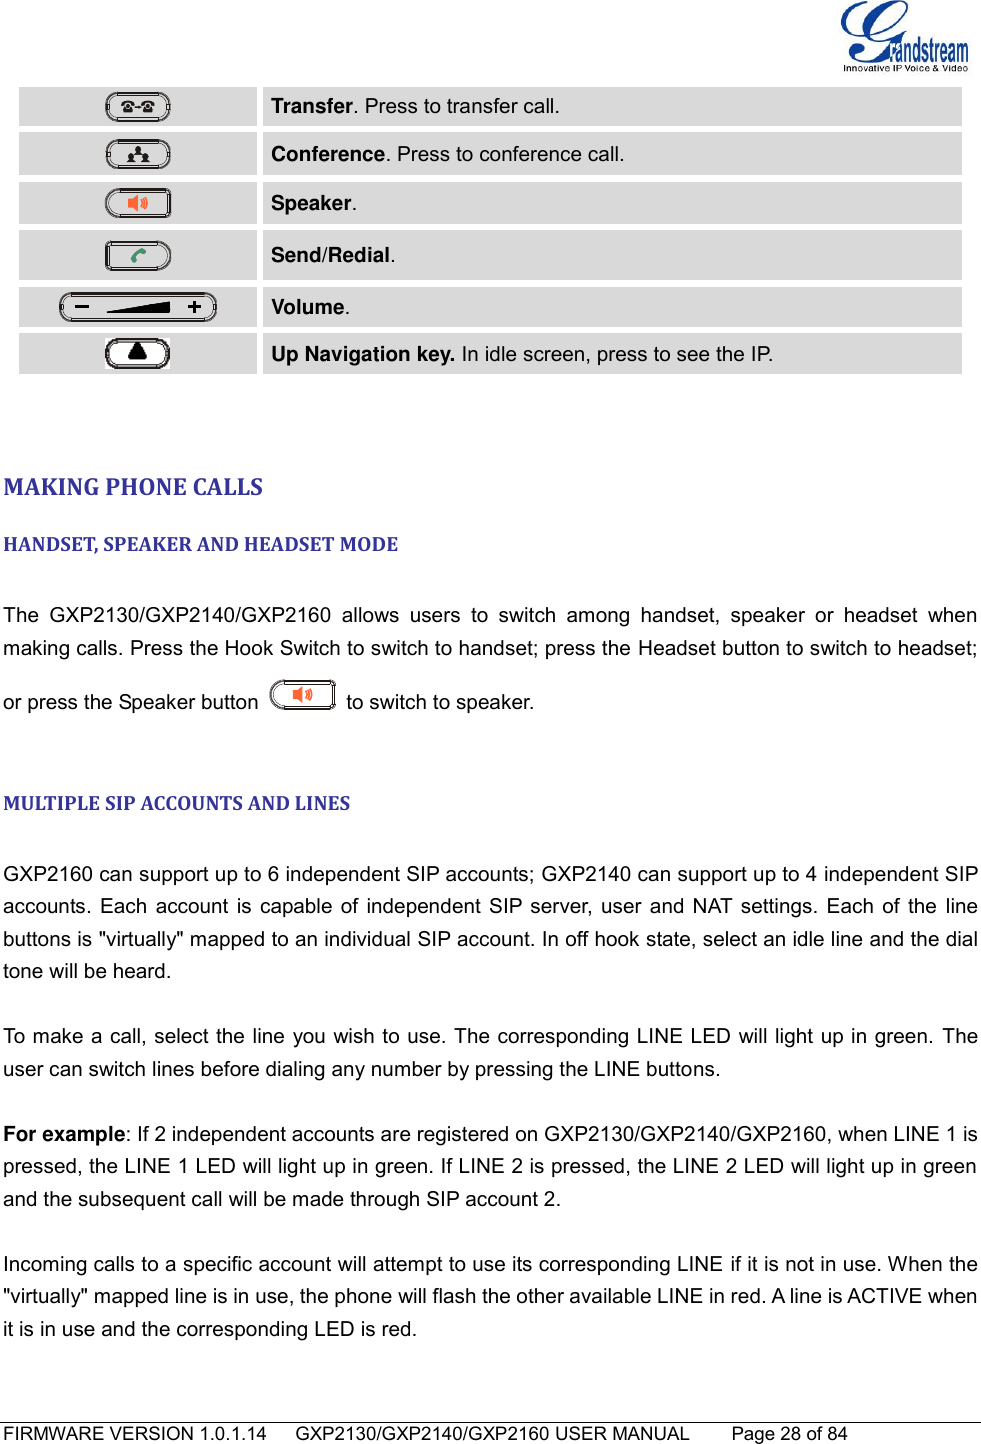   FIRMWARE VERSION 1.0.1.14      GXP2130/GXP2140/GXP2160 USER MANUAL     Page 28 of 84                                    Transfer. Press to transfer call.  Conference. Press to conference call.  Speaker.  Send/Redial.  Volume.  Up Navigation key. In idle screen, press to see the IP.     MAKING PHONE CALLS HANDSET, SPEAKER AND HEADSET MODE  The  GXP2130/GXP2140/GXP2160  allows  users  to  switch  among  handset,  speaker  or  headset  when making calls. Press the Hook Switch to switch to handset; press the Headset button to switch to headset; or press the Speaker button    to switch to speaker.  MULTIPLE SIP ACCOUNTS AND LINES  GXP2160 can support up to 6 independent SIP accounts; GXP2140 can support up to 4 independent SIP accounts. Each account is capable of independent SIP server, user and NAT settings. Each of the line buttons is &quot;virtually&quot; mapped to an individual SIP account. In off hook state, select an idle line and the dial tone will be heard.   To make a call, select the line you wish to use. The corresponding LINE LED will light up in green. The user can switch lines before dialing any number by pressing the LINE buttons.  For example: If 2 independent accounts are registered on GXP2130/GXP2140/GXP2160, when LINE 1 is pressed, the LINE 1 LED will light up in green. If LINE 2 is pressed, the LINE 2 LED will light up in green and the subsequent call will be made through SIP account 2.  Incoming calls to a specific account will attempt to use its corresponding LINE if it is not in use. When the &quot;virtually&quot; mapped line is in use, the phone will flash the other available LINE in red. A line is ACTIVE when it is in use and the corresponding LED is red.  